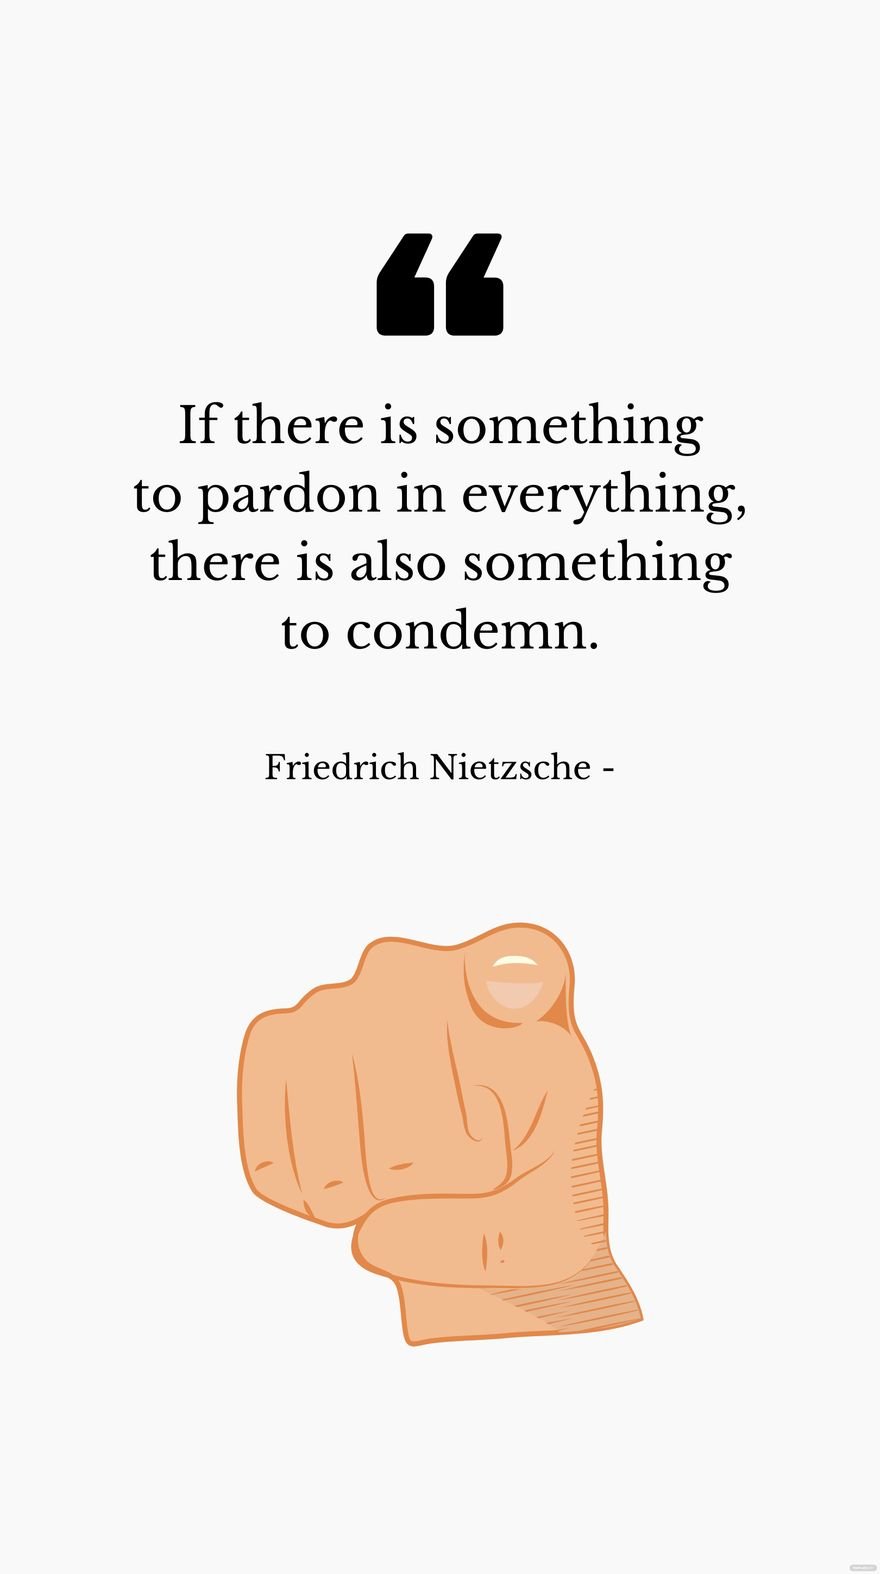 Friedrich Nietzsche - If there is something to pardon in everything, there is also something to condemn.